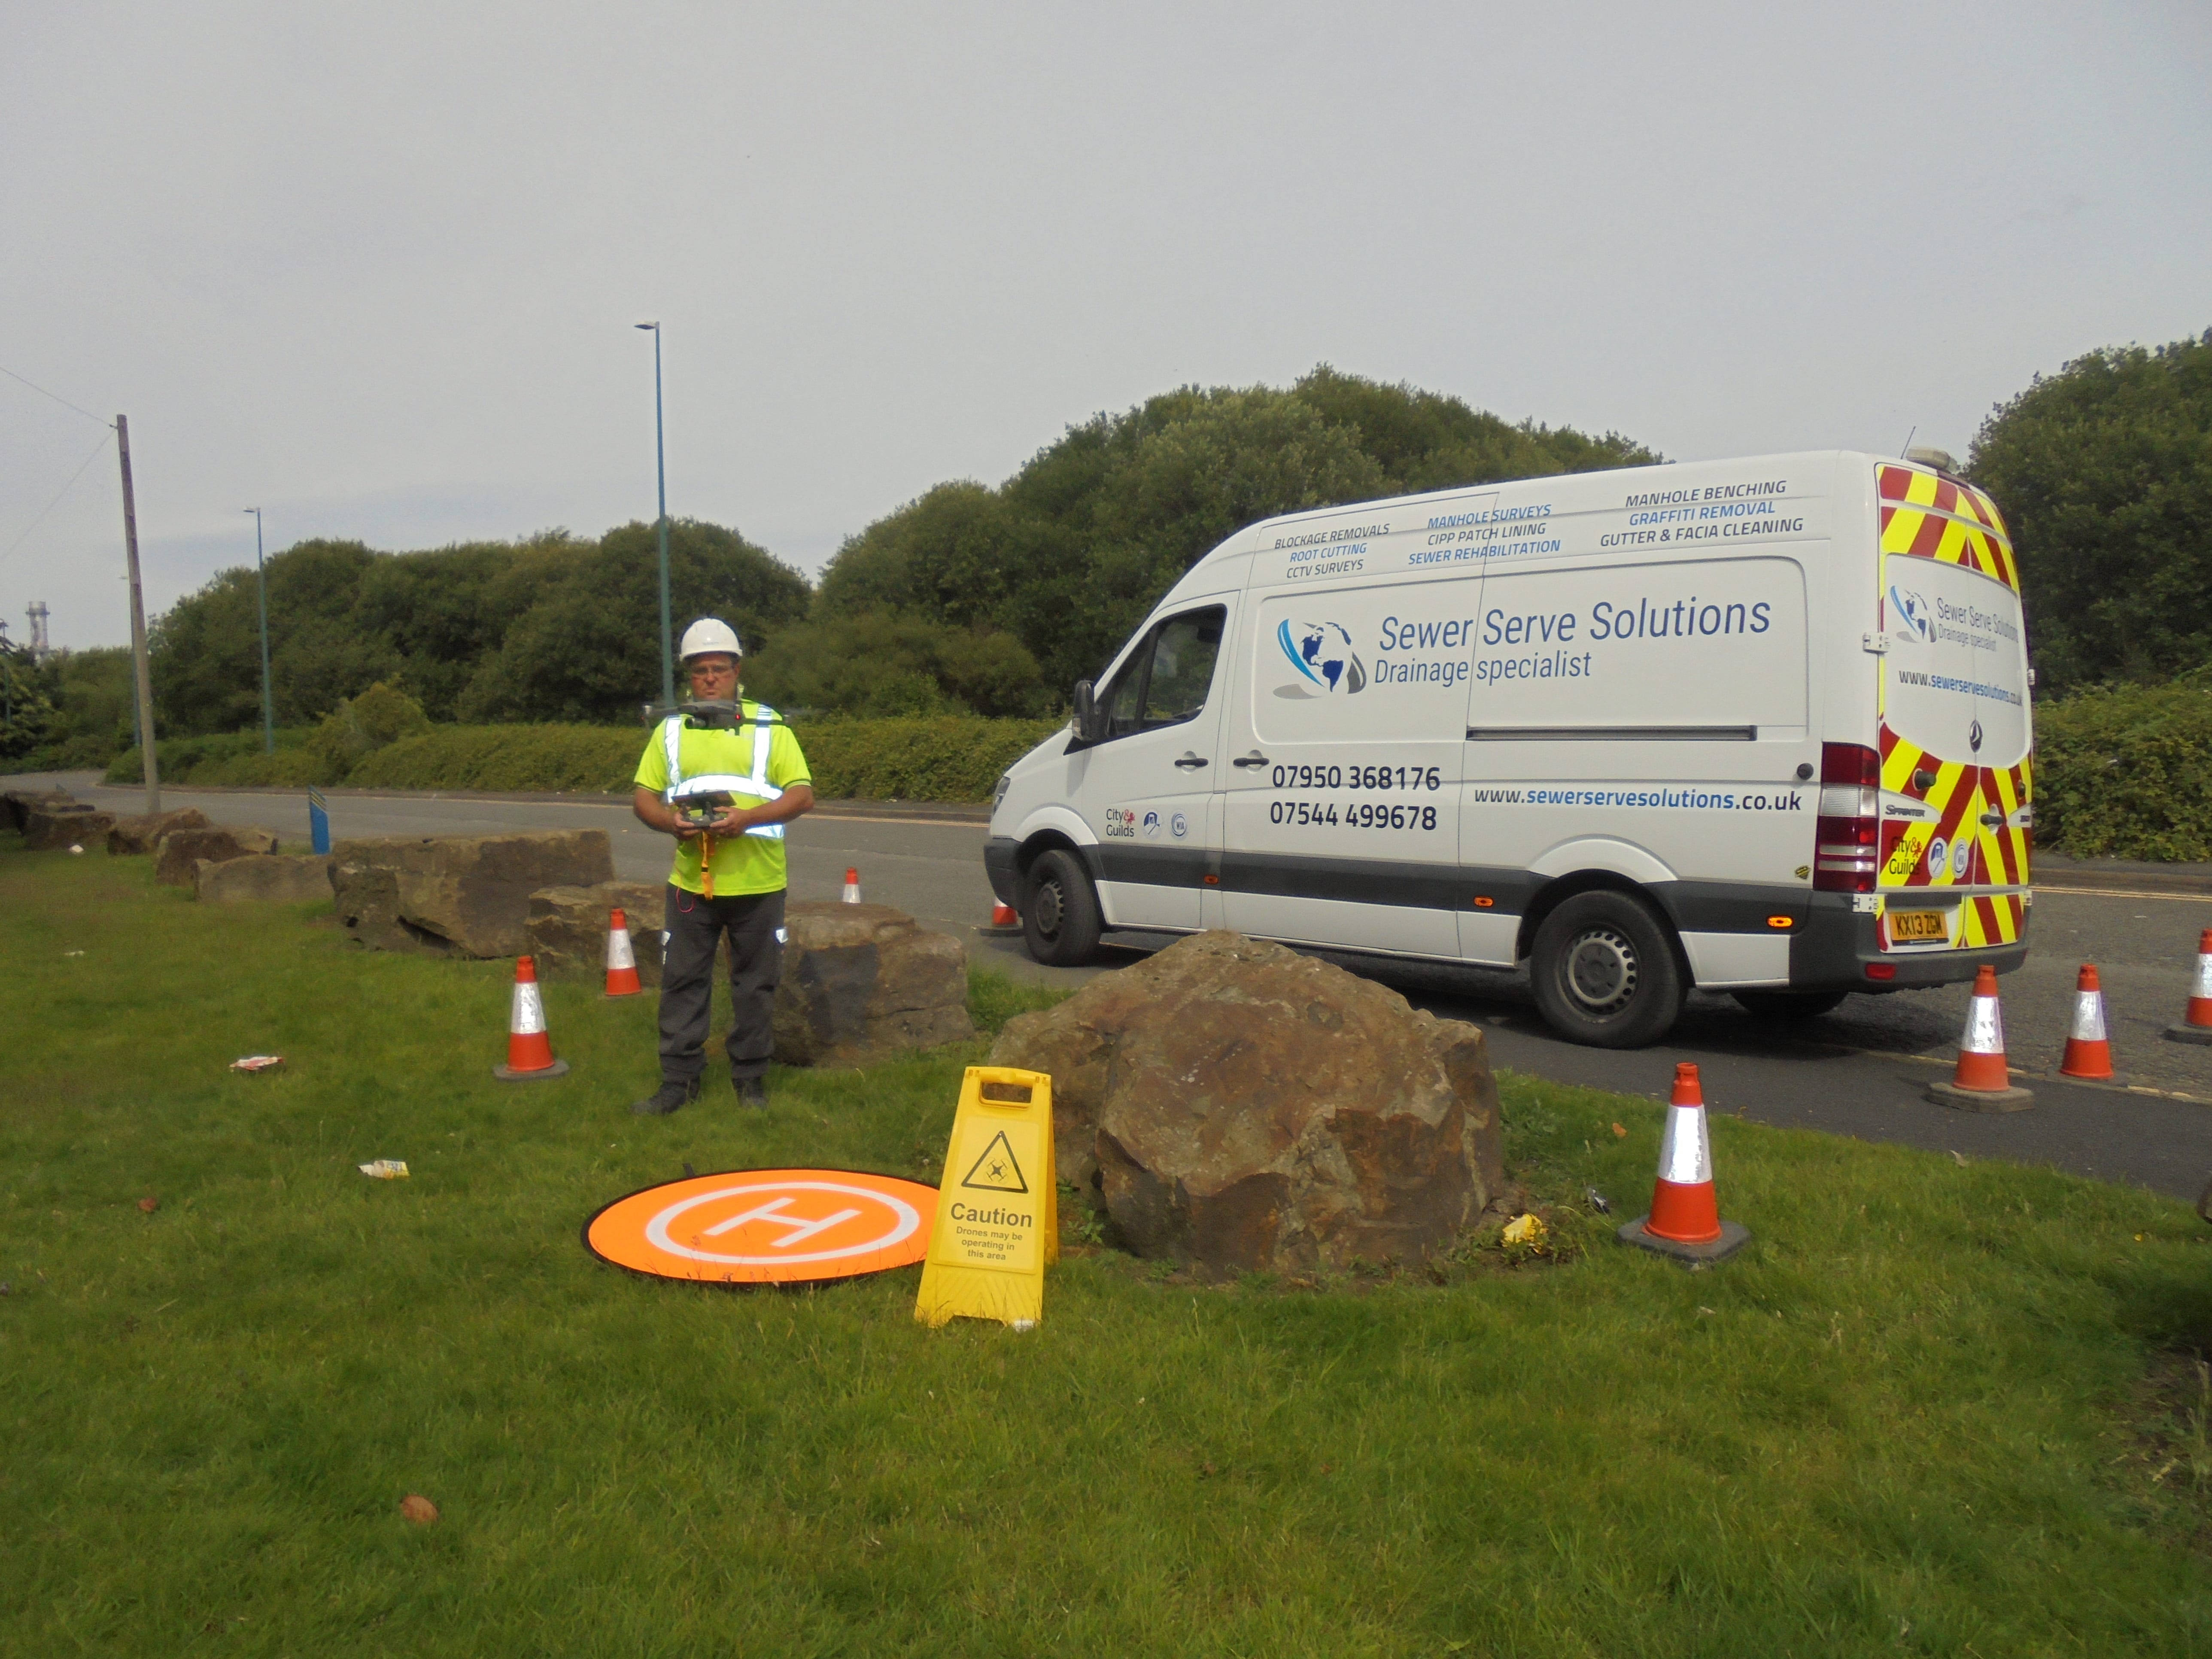 Sewer Drone Plotting-Salford Manchester-Sewer Serve Solutions